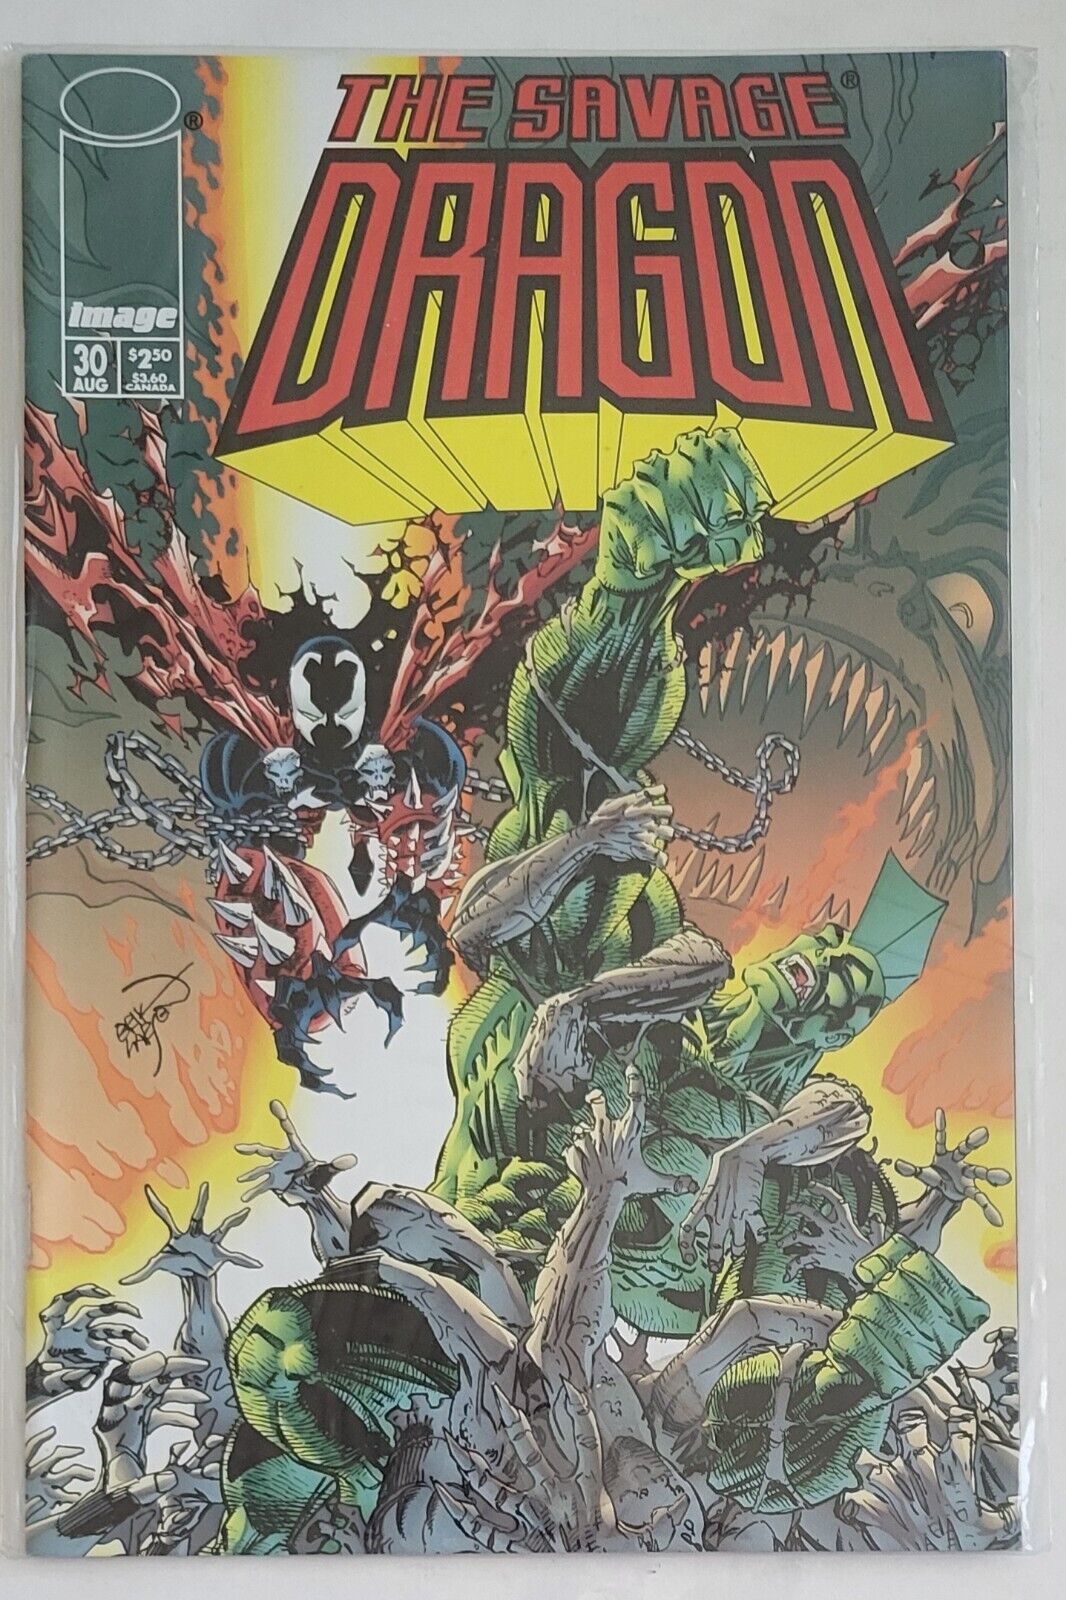 Image Comic Book....The Savage Dragon #30, August 1996, Very Good Condition 